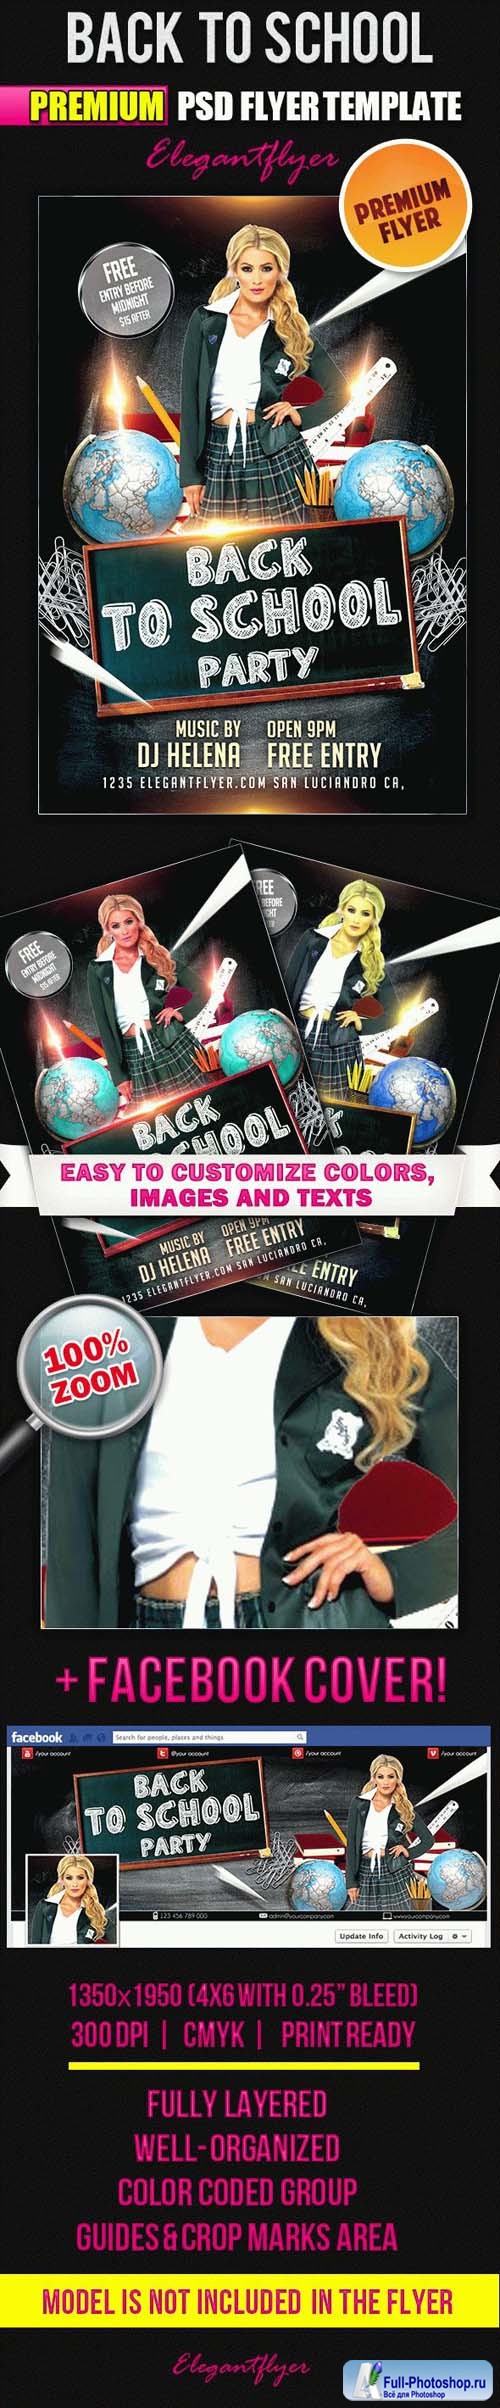 Back to School Party PSD Flyer